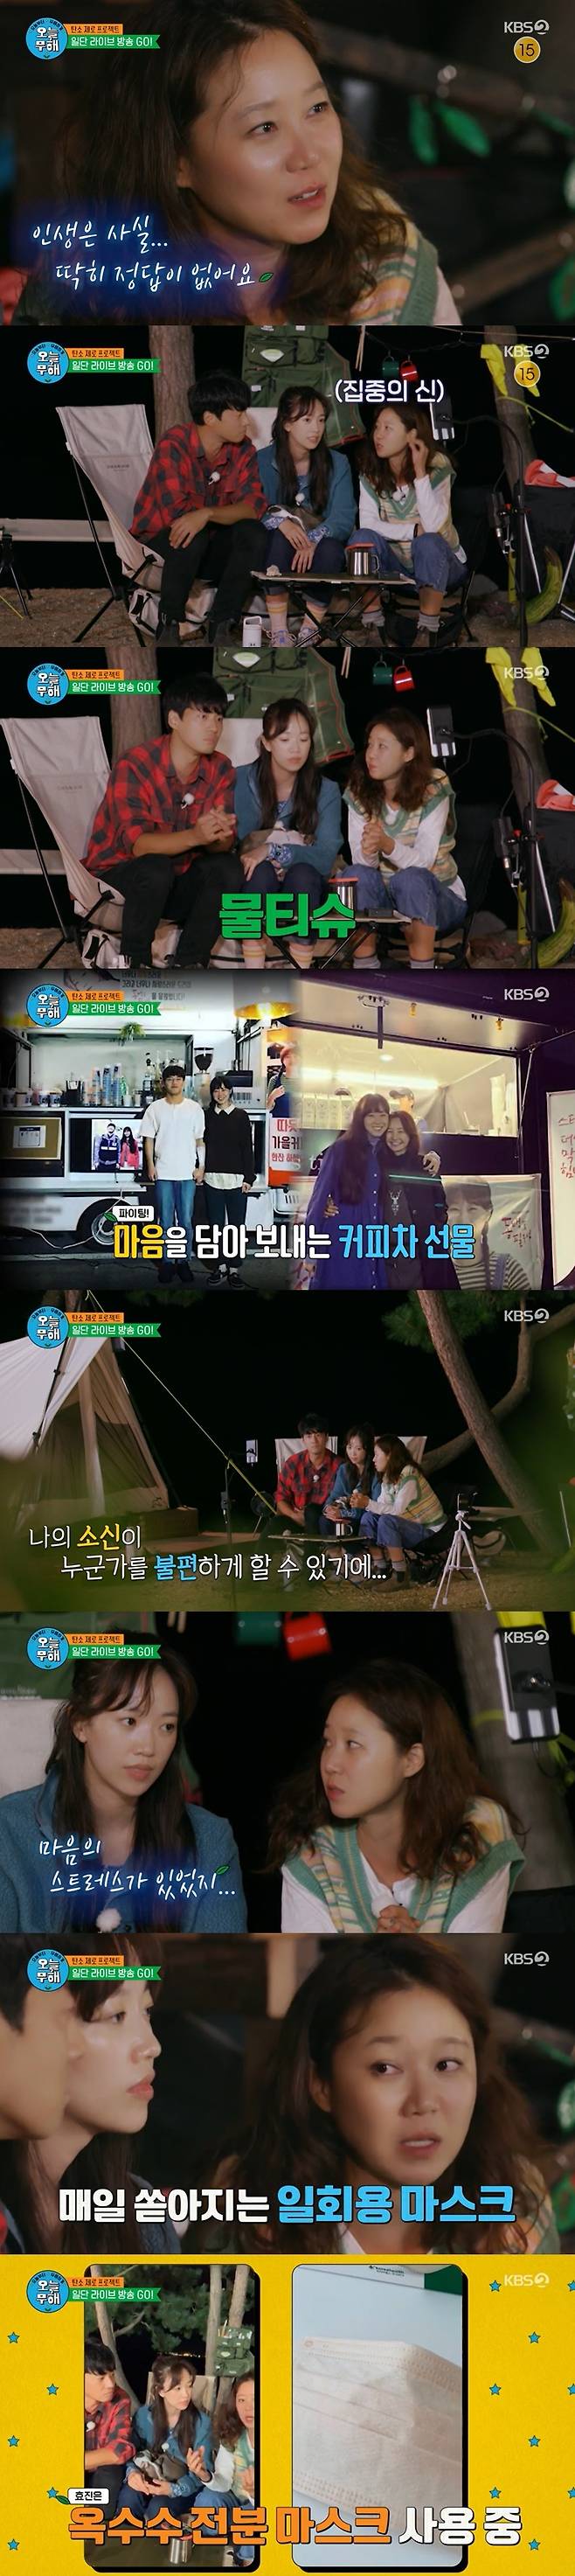 Seoul) = Actor Gong Hyo-jin confessed his intention to Environmentally friendly activities.In the KBS 2TV entertainment program From Today to Innocence broadcasted on the 28th, Gong Hyo-jin continued the Carbon Xero project with Lee Chun-hee and Jeon Hye-jin.The three people caught the attention of the SNS live broadcast. At this point, Gong Hyo-jin talked about life. Life is not really right.There is nothing certain, and perfectly I can not say that I live harmless. I want to see the broadcast as fun and I want to make sure that I will try to do it harmless today.They talked about the most common garbage in everyday life. The most popular pic of viewers was bottled water.Its been bottled water these days, but its like wet tissues.It takes less than a minute to write, but it takes more than 100 years to rot, so maybe later, if you dig the ground, you will not get a wet tissue. He also mentioned snacks and coffee teas that are popular on the set.Gong Hyo-jin said, When we fight in the field anyway, and when the snack car comes, it does not make sense to say I do not use it, so there are times when we just go over to various things. (Snack tea, coffee tea) I was stressed in my mind. Gong Hyo-jin said, I want to drink ice americano, but if I do not have a tumbler, I just endure it. I think I should go home and drink.It seemed a little bit before, it seemed to be getting rid of disposable products, but I came back, said Gong Hyo-jin. What are you going to do with this mask?If you cant, dont you come out one by one a day?He said he would like to change the material of the mask.Gong Hyo-jin said, I am wearing a corn starch mask now, but the price is almost three times. If the number of people using it increases, the price will stabilize.Meanwhile, To Be Harmless From Today is a Phil (Neutral) environmental entertainment that stays in nature without traces and challenges Carbon Xero (neutral) life. It will be broadcast every Thursday at 10:40 p.m.